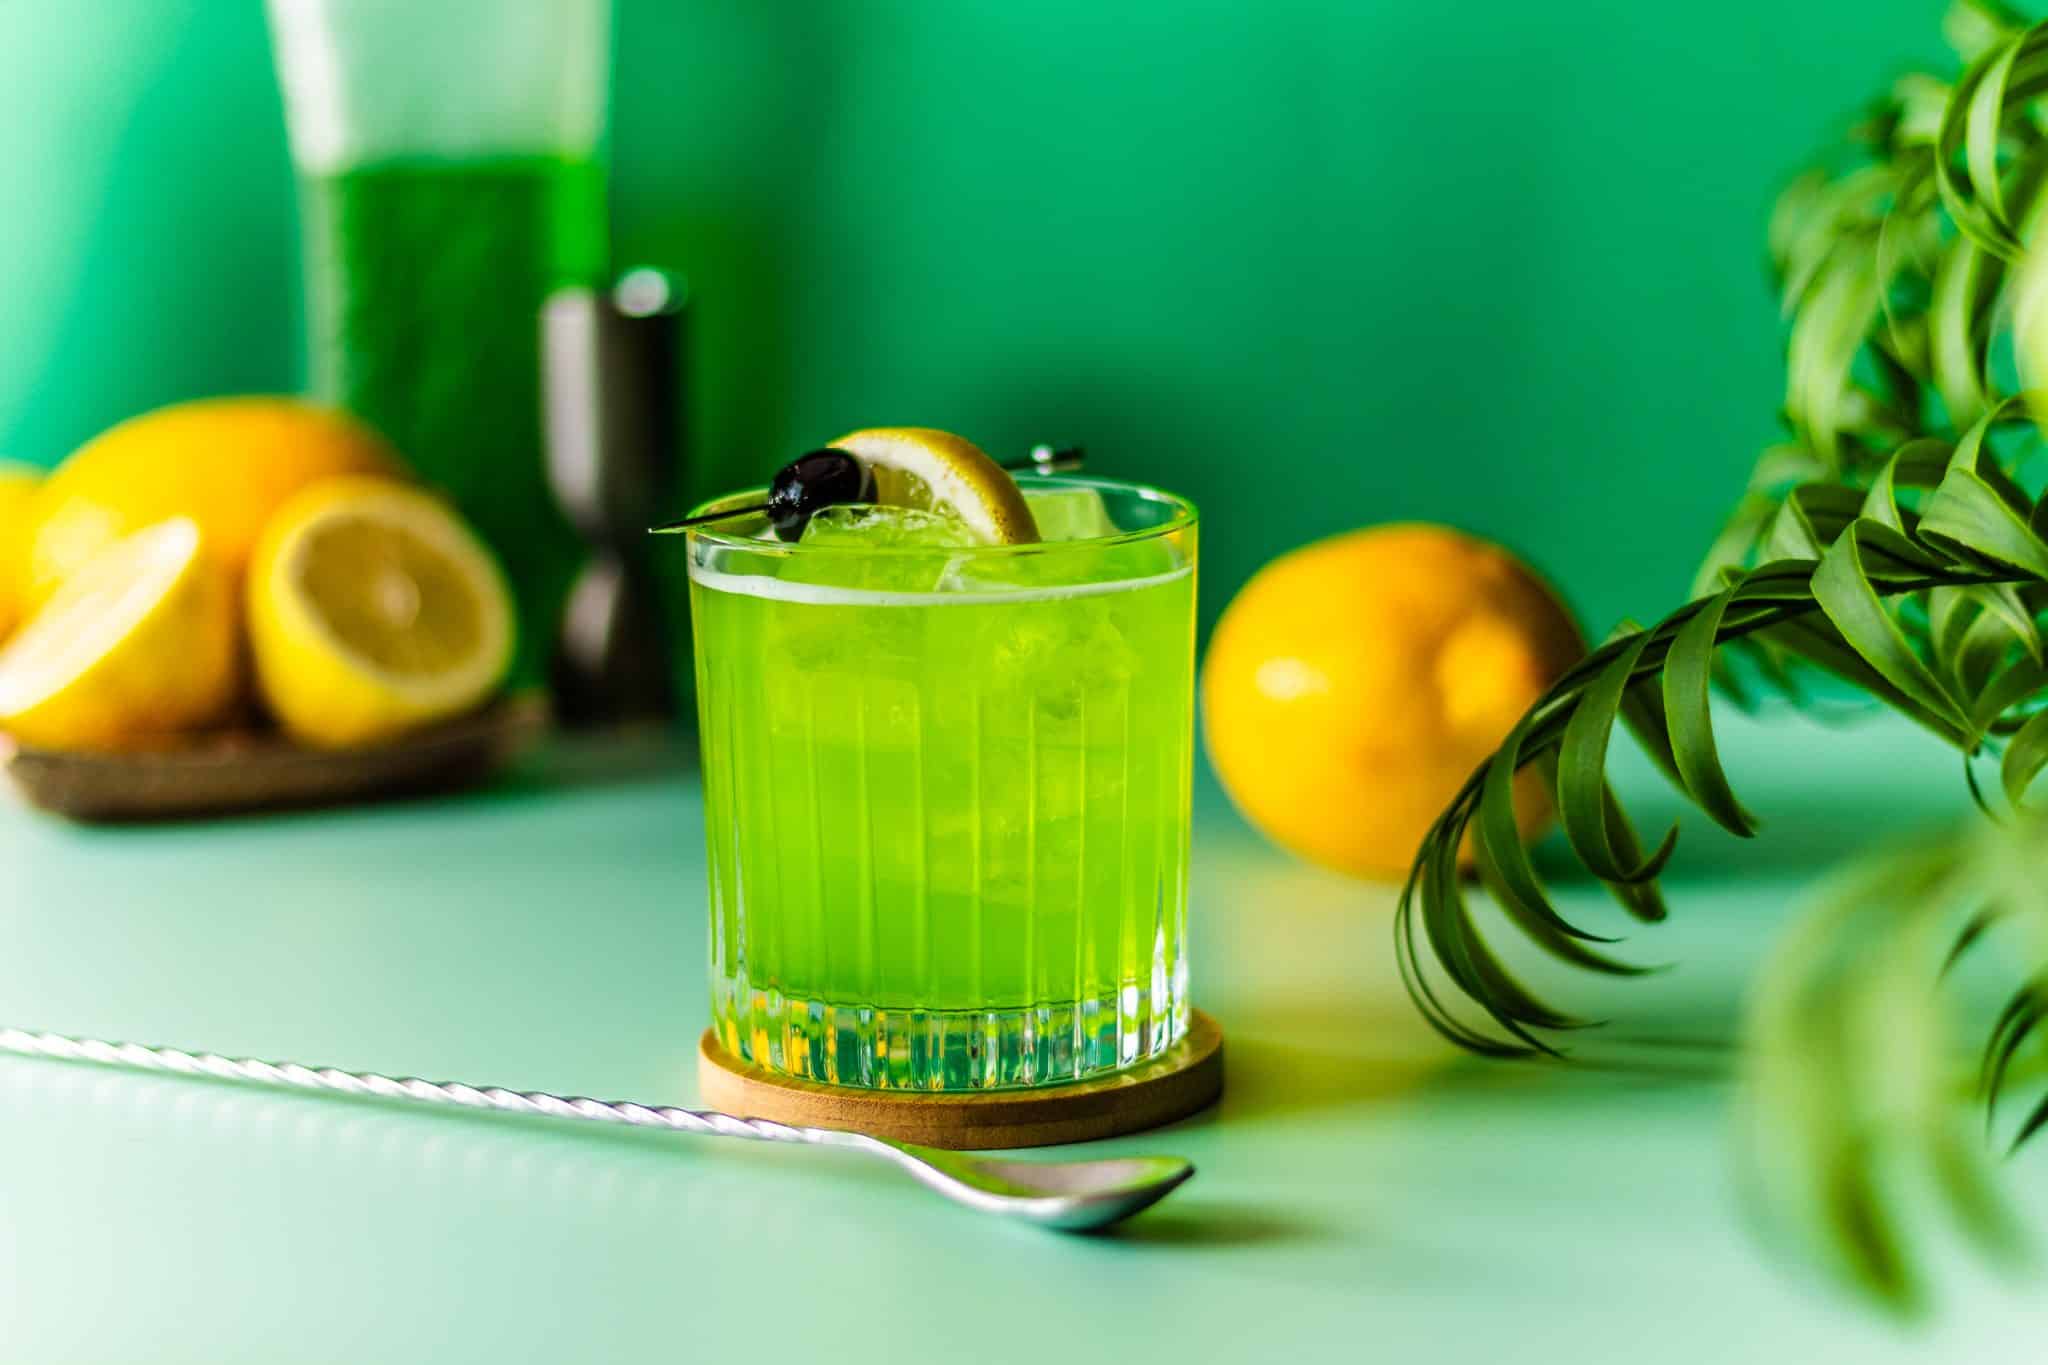 A side shot of a Midori Sour cocktail in an old-fashioned glass on a brown coaster placed on a green table with a bar spoon in front and some lemons on the background